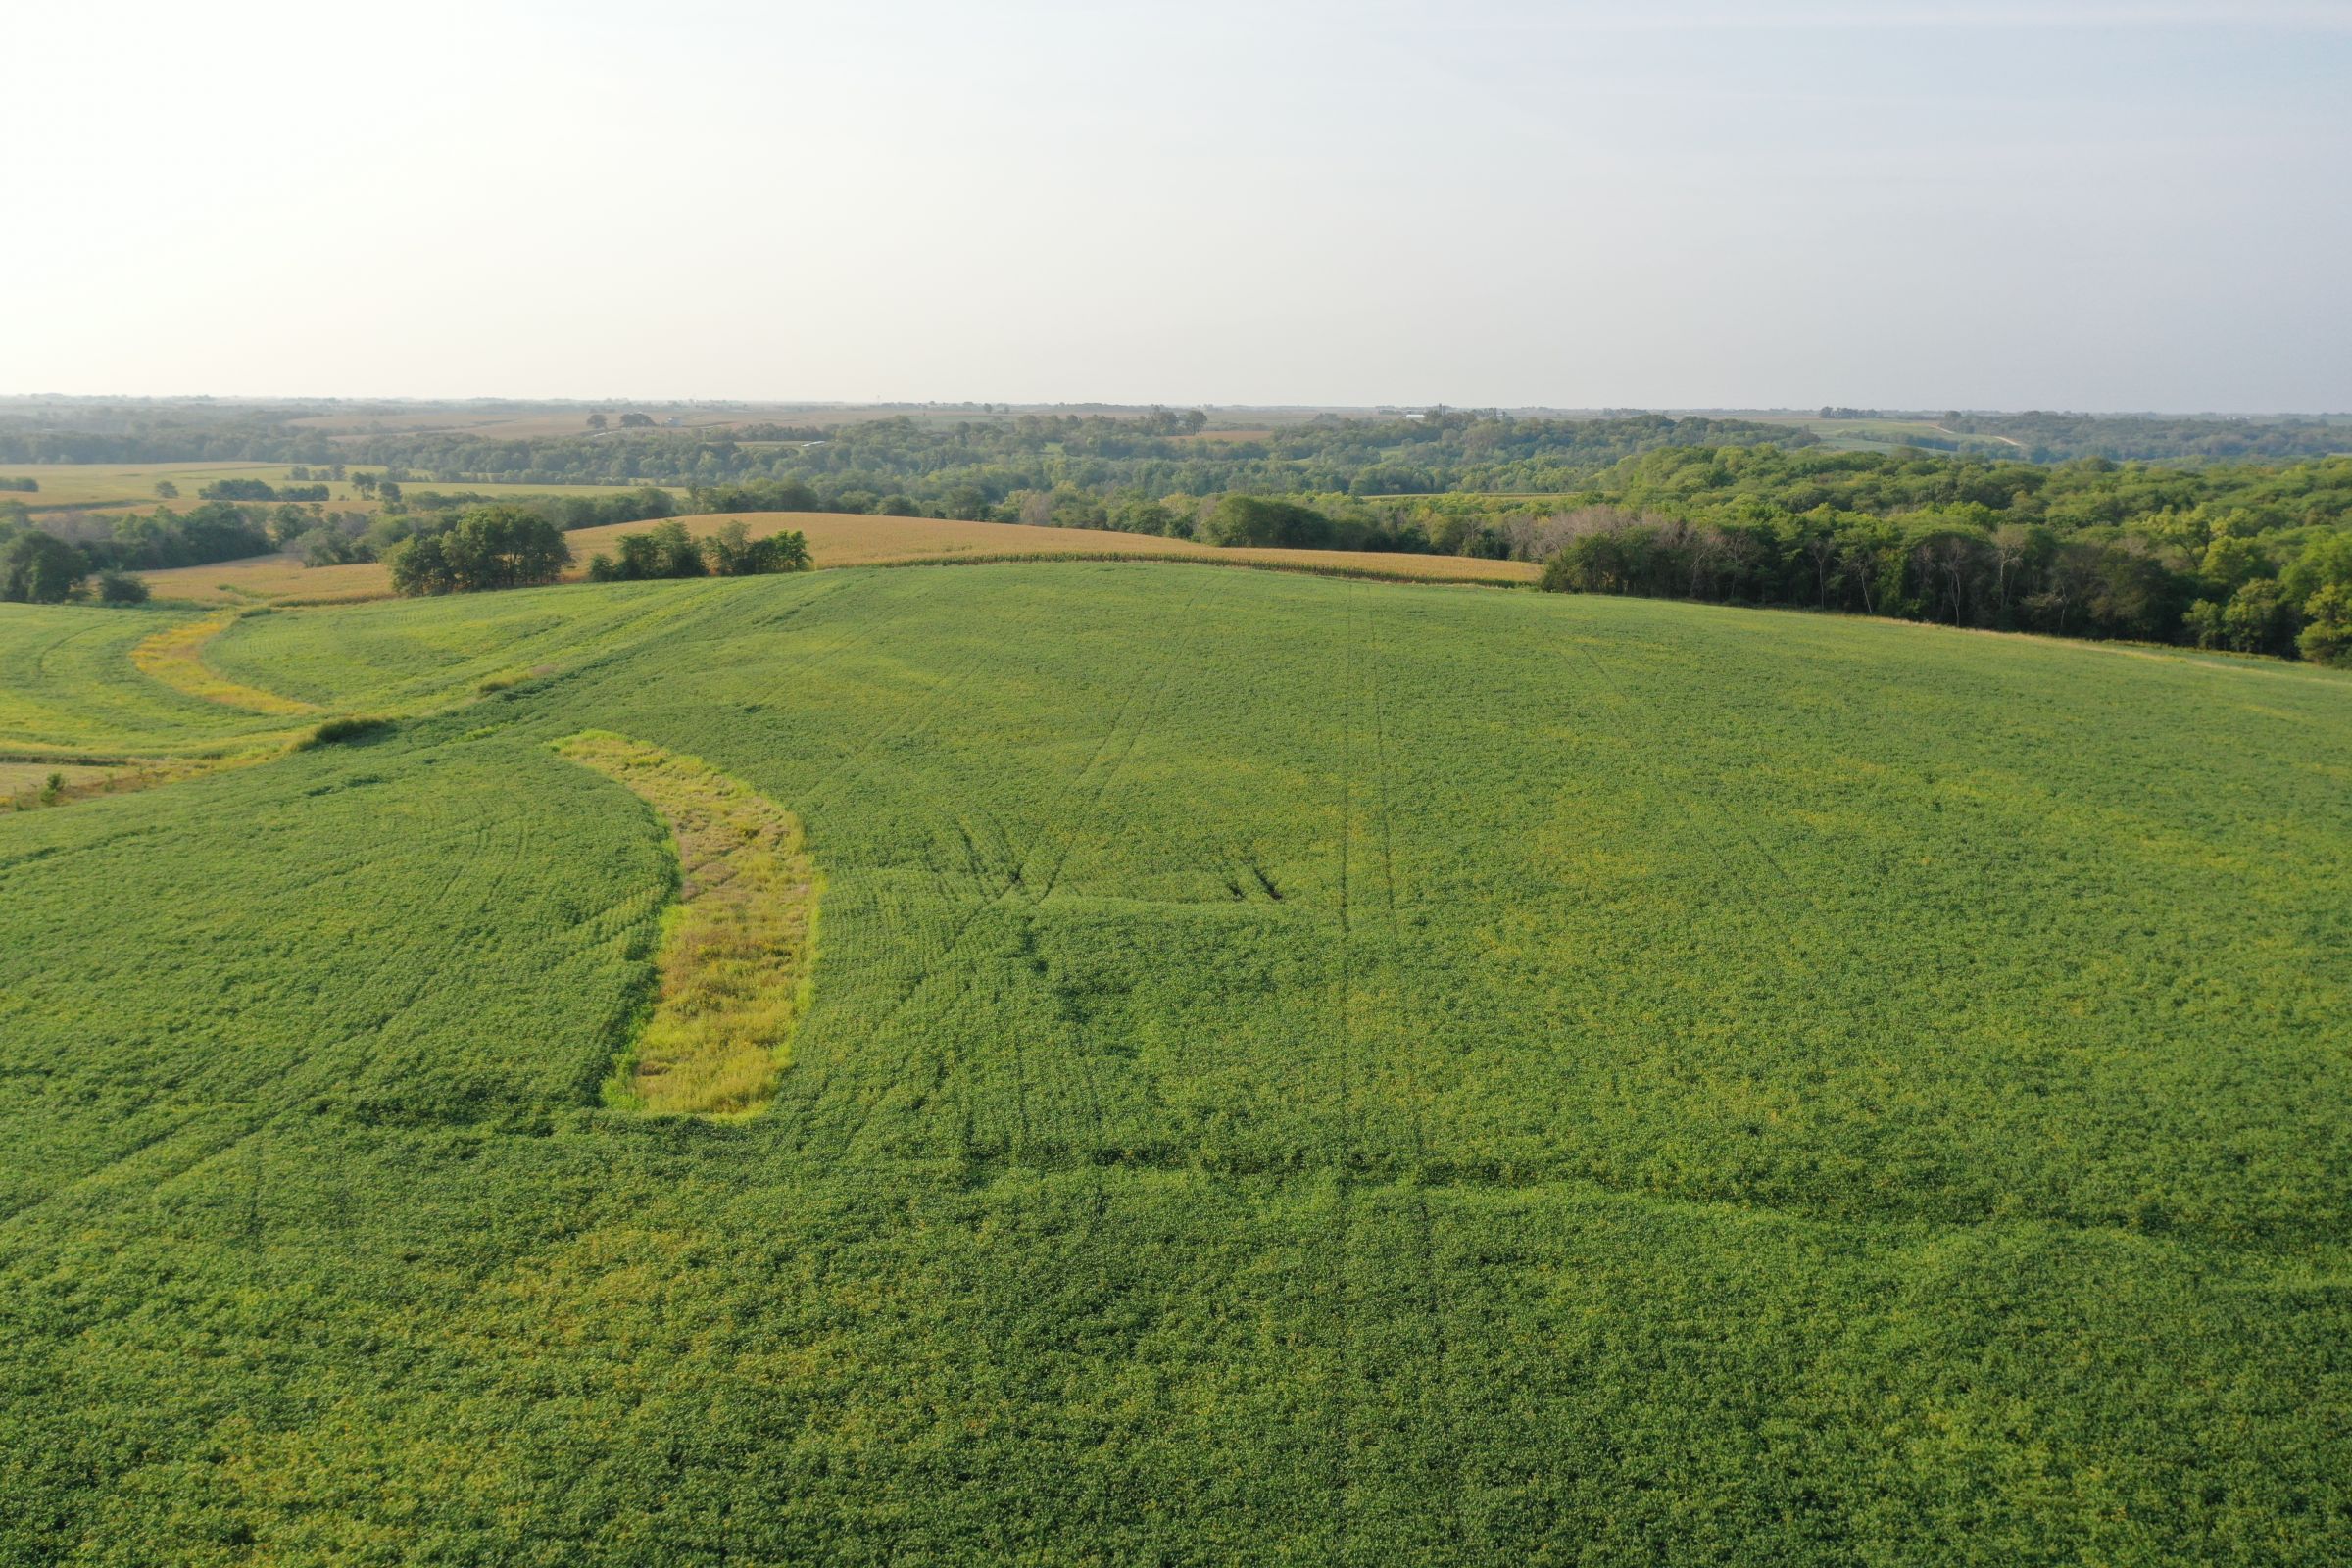 auctions-marion-county-iowa-70-acres-listing-number-15722-4-2021-09-07-170948.JPG